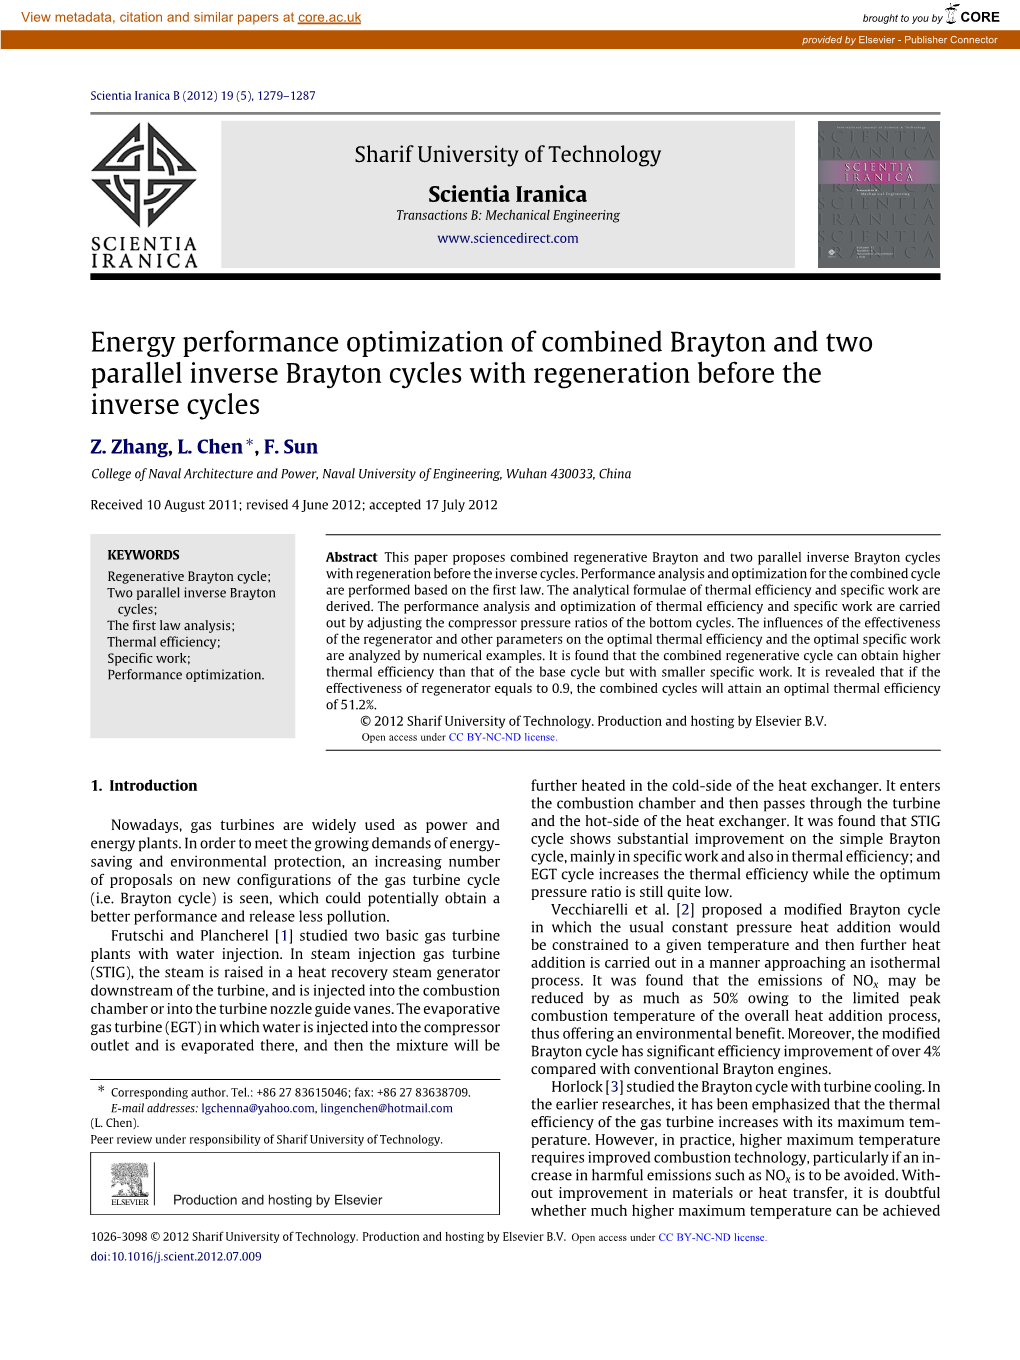 Energy Performance Optimization of Combined Brayton and Two Parallel Inverse Brayton Cycles with Regeneration Before the Inverse Cycles